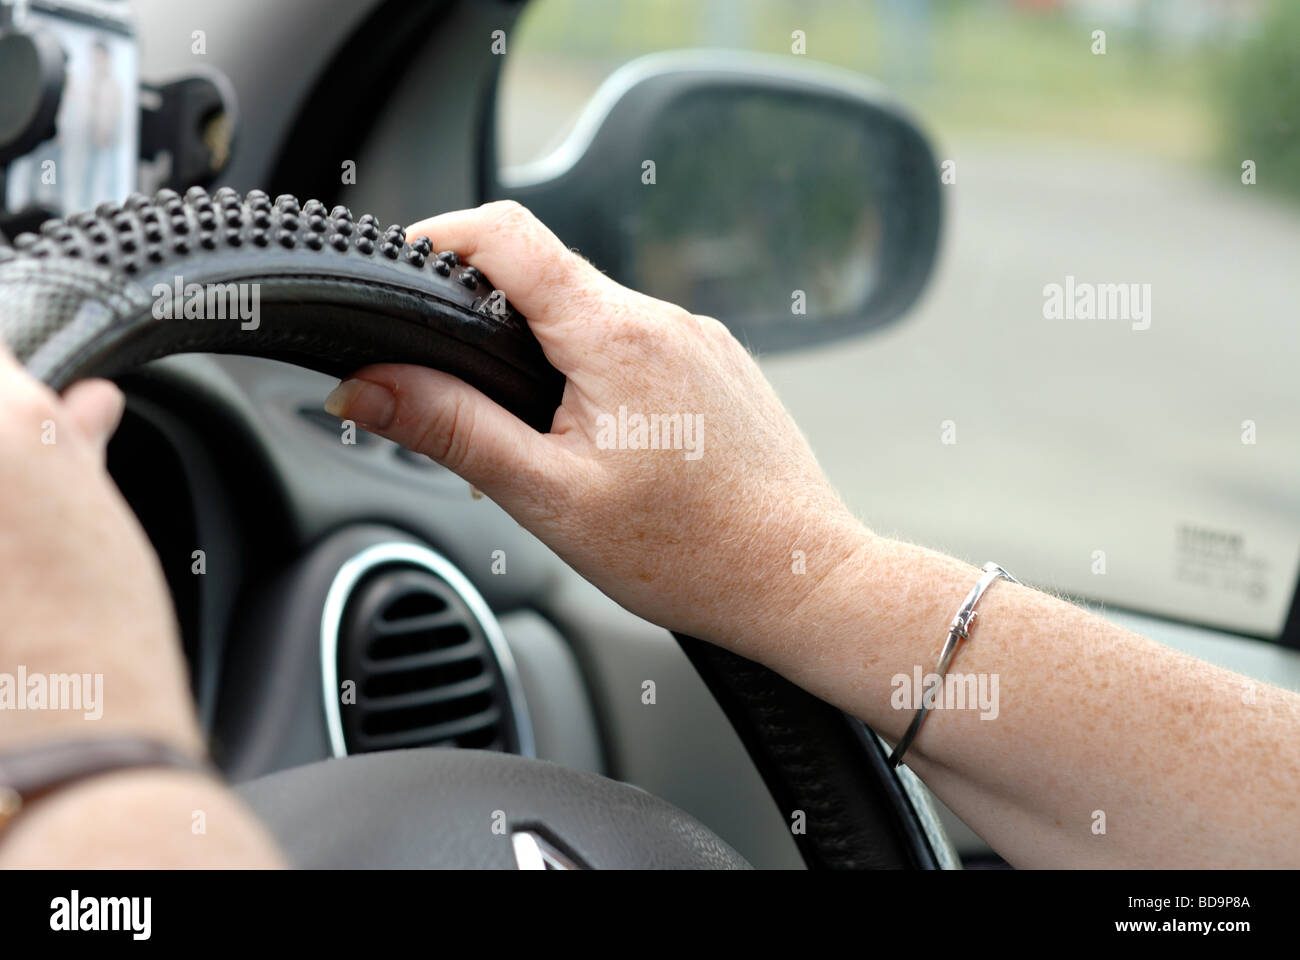 Driving a car Stock Photo